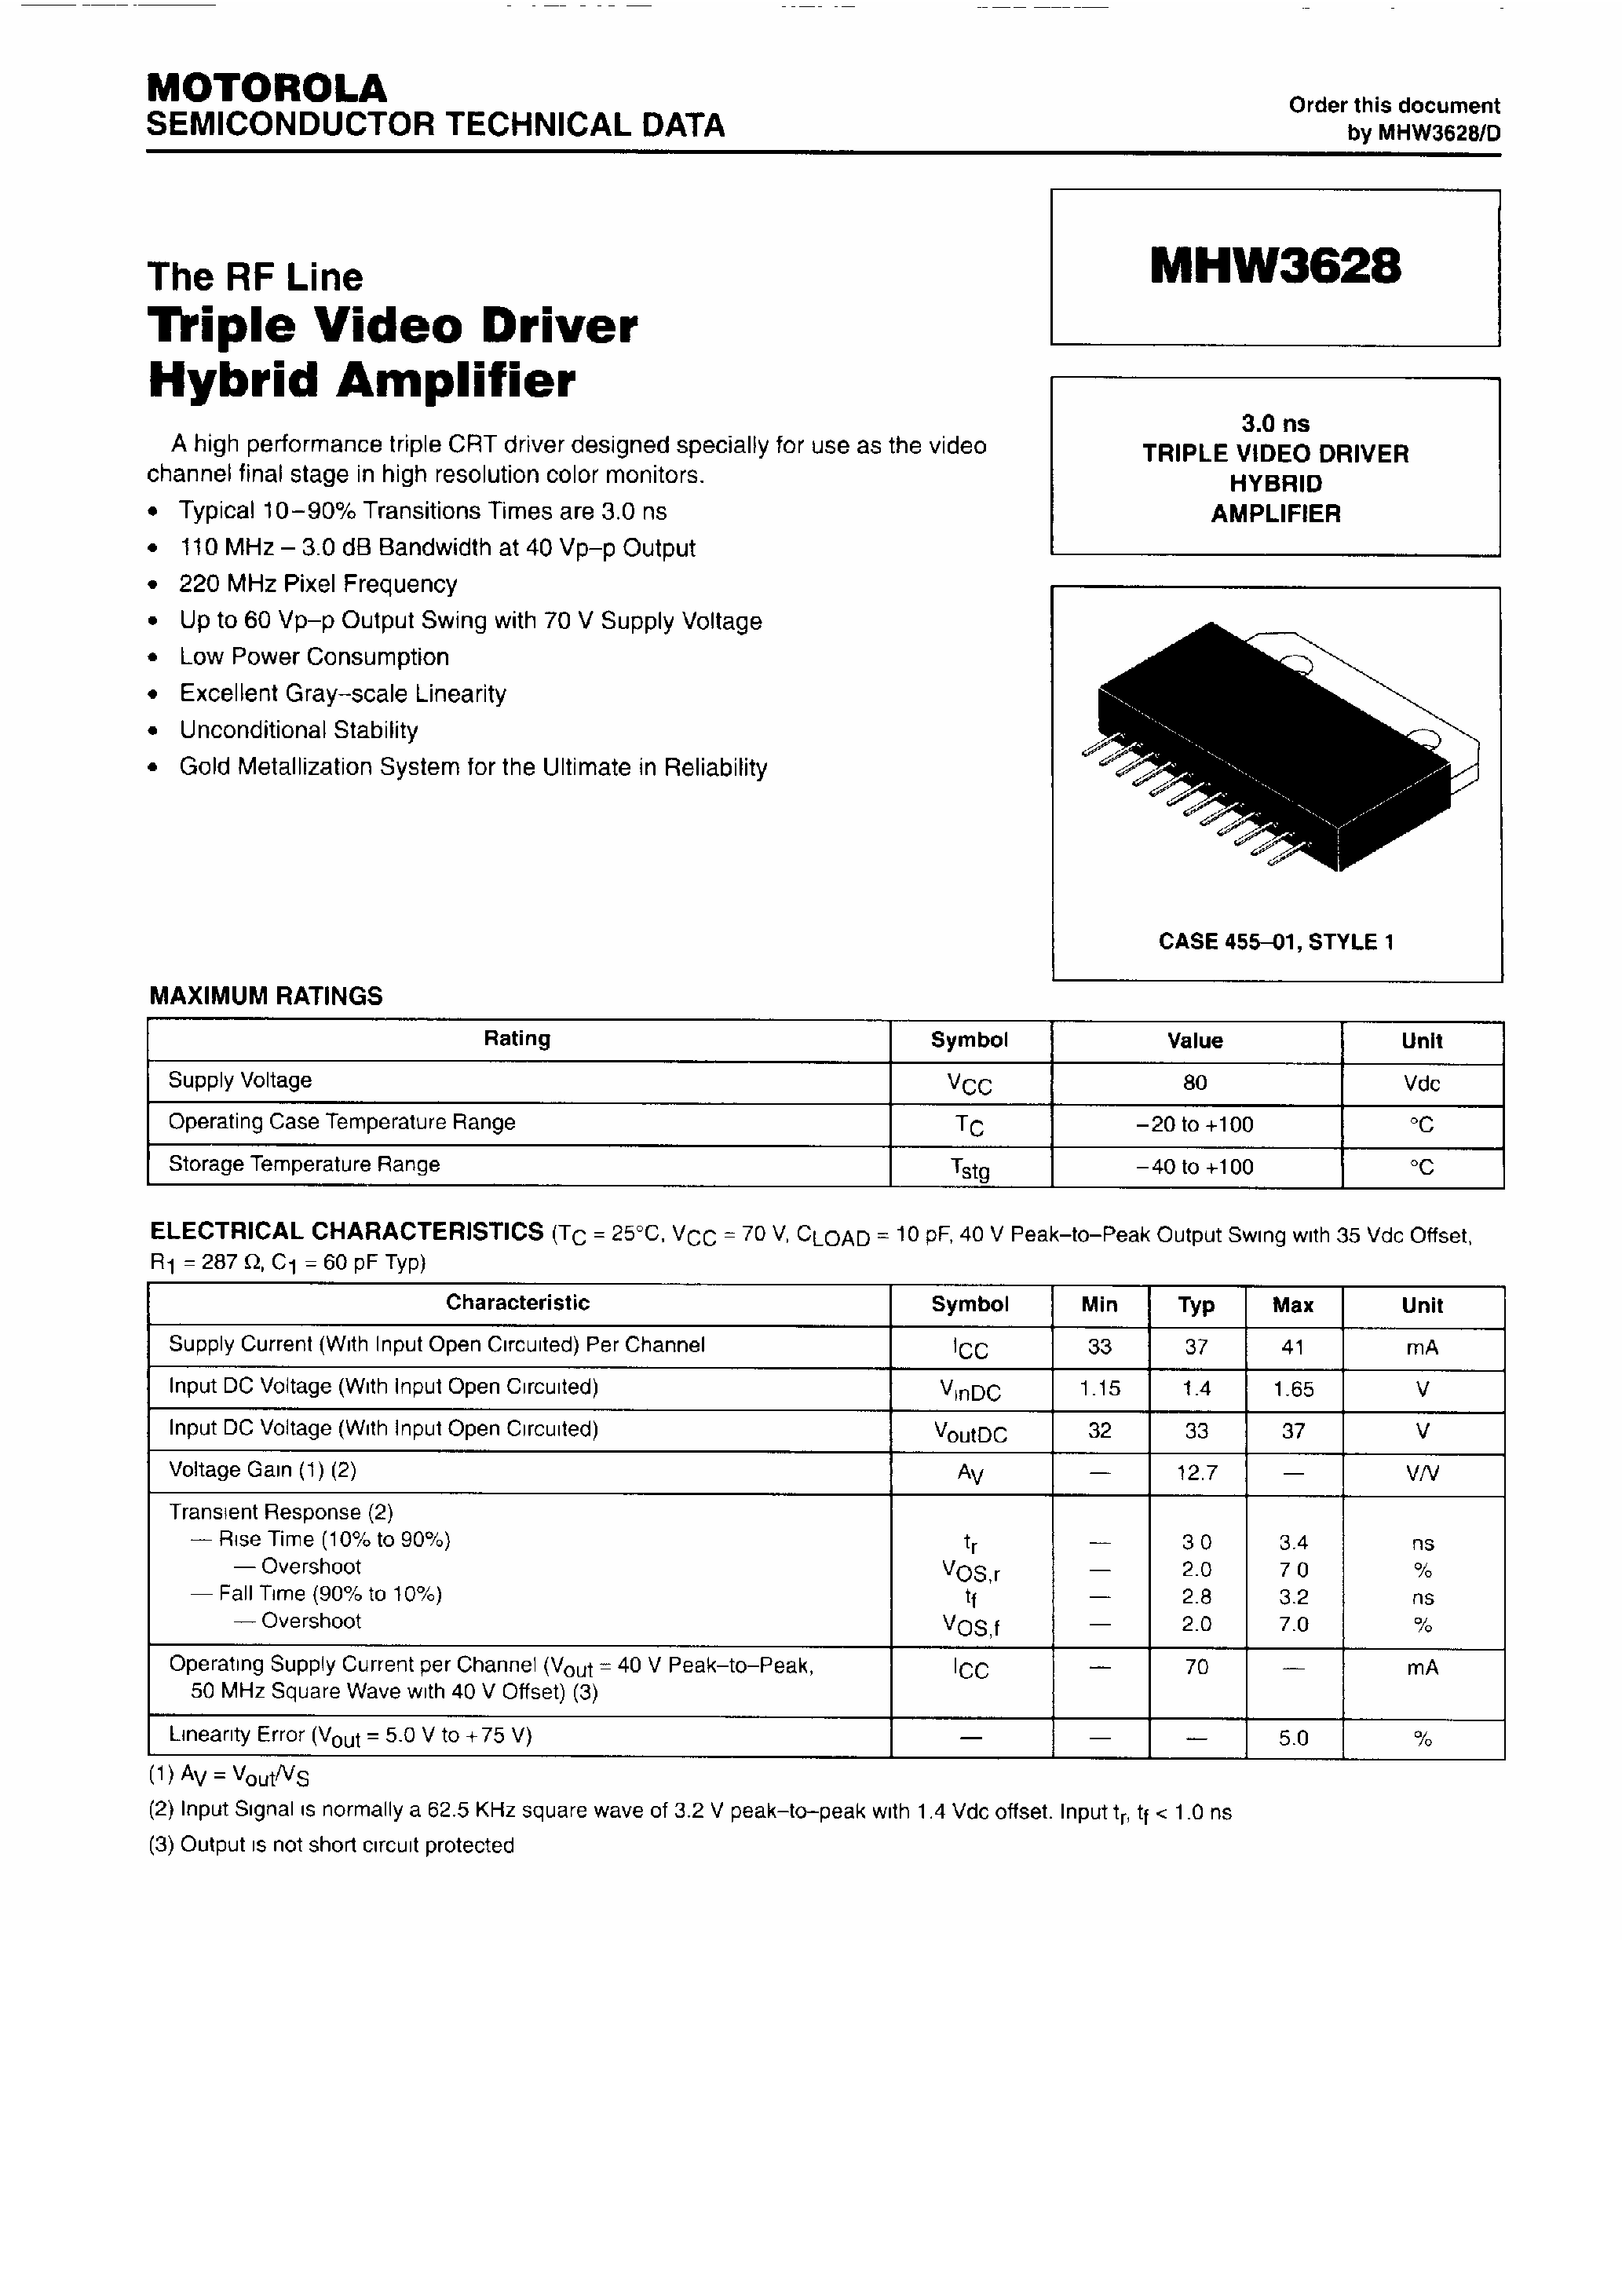 Datasheet MHW3628 - Semiconductor Technical Data page 1